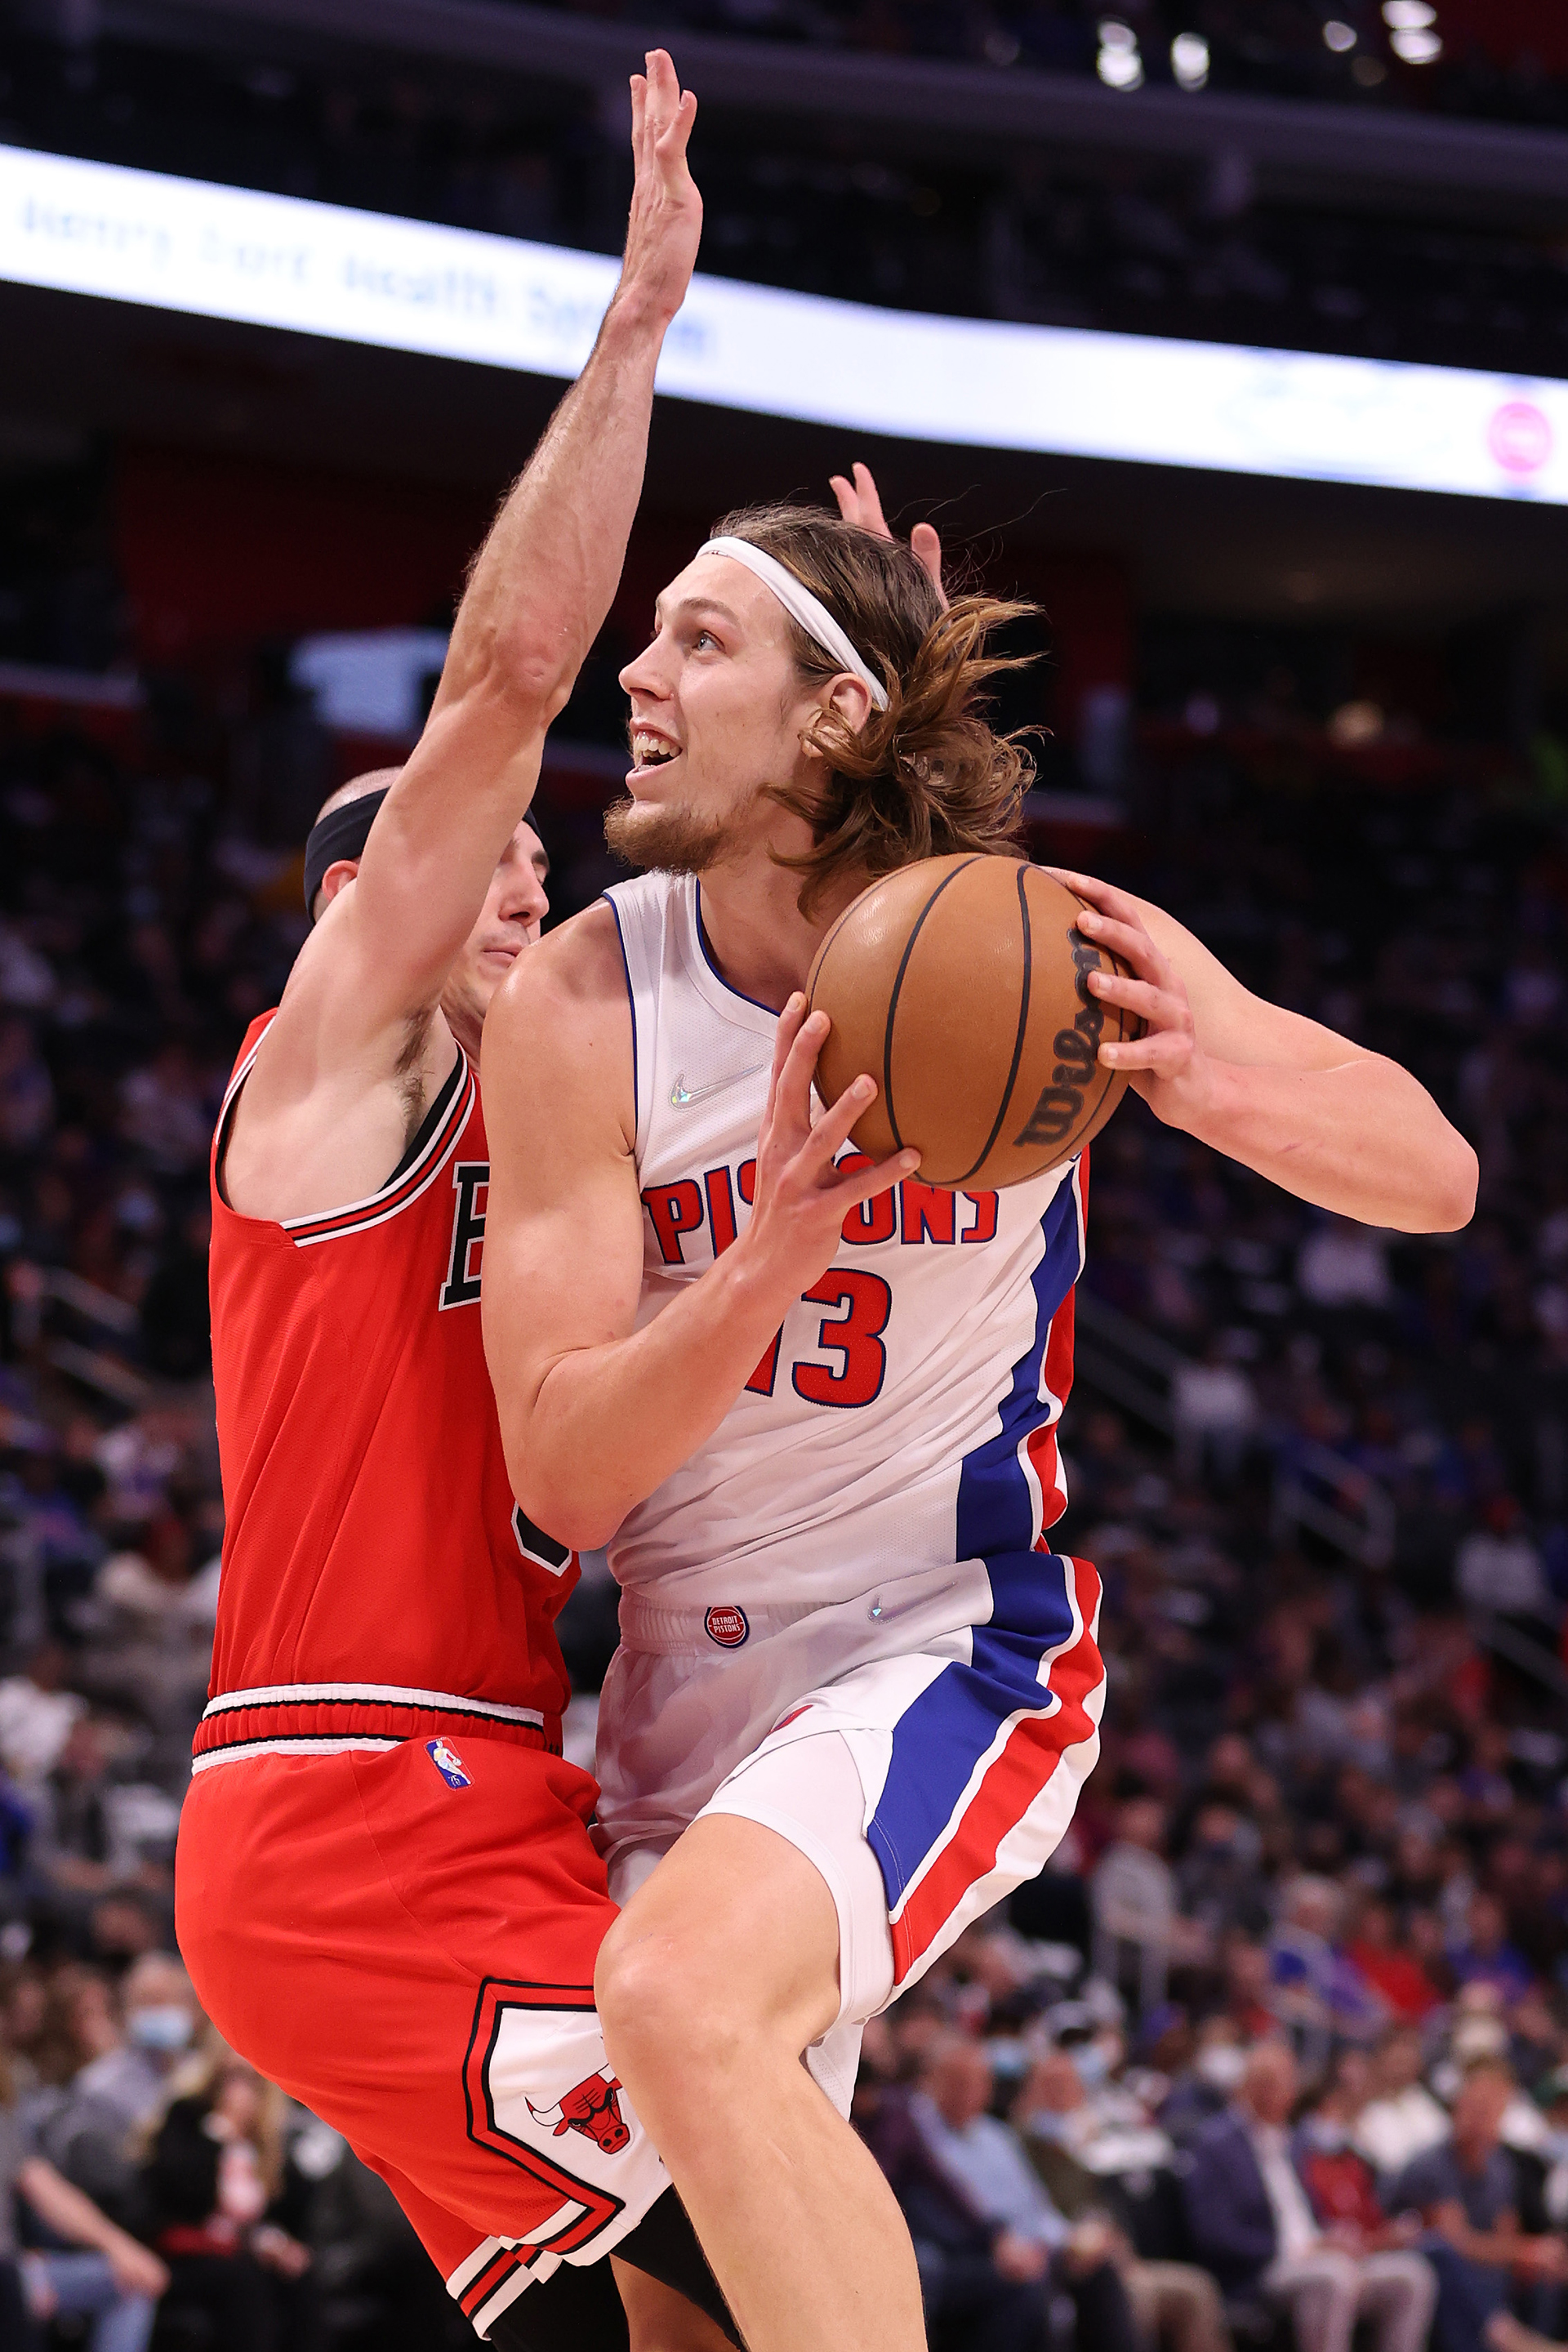 Kelly Olynyk jumps on the court for the Detroit Pistons.